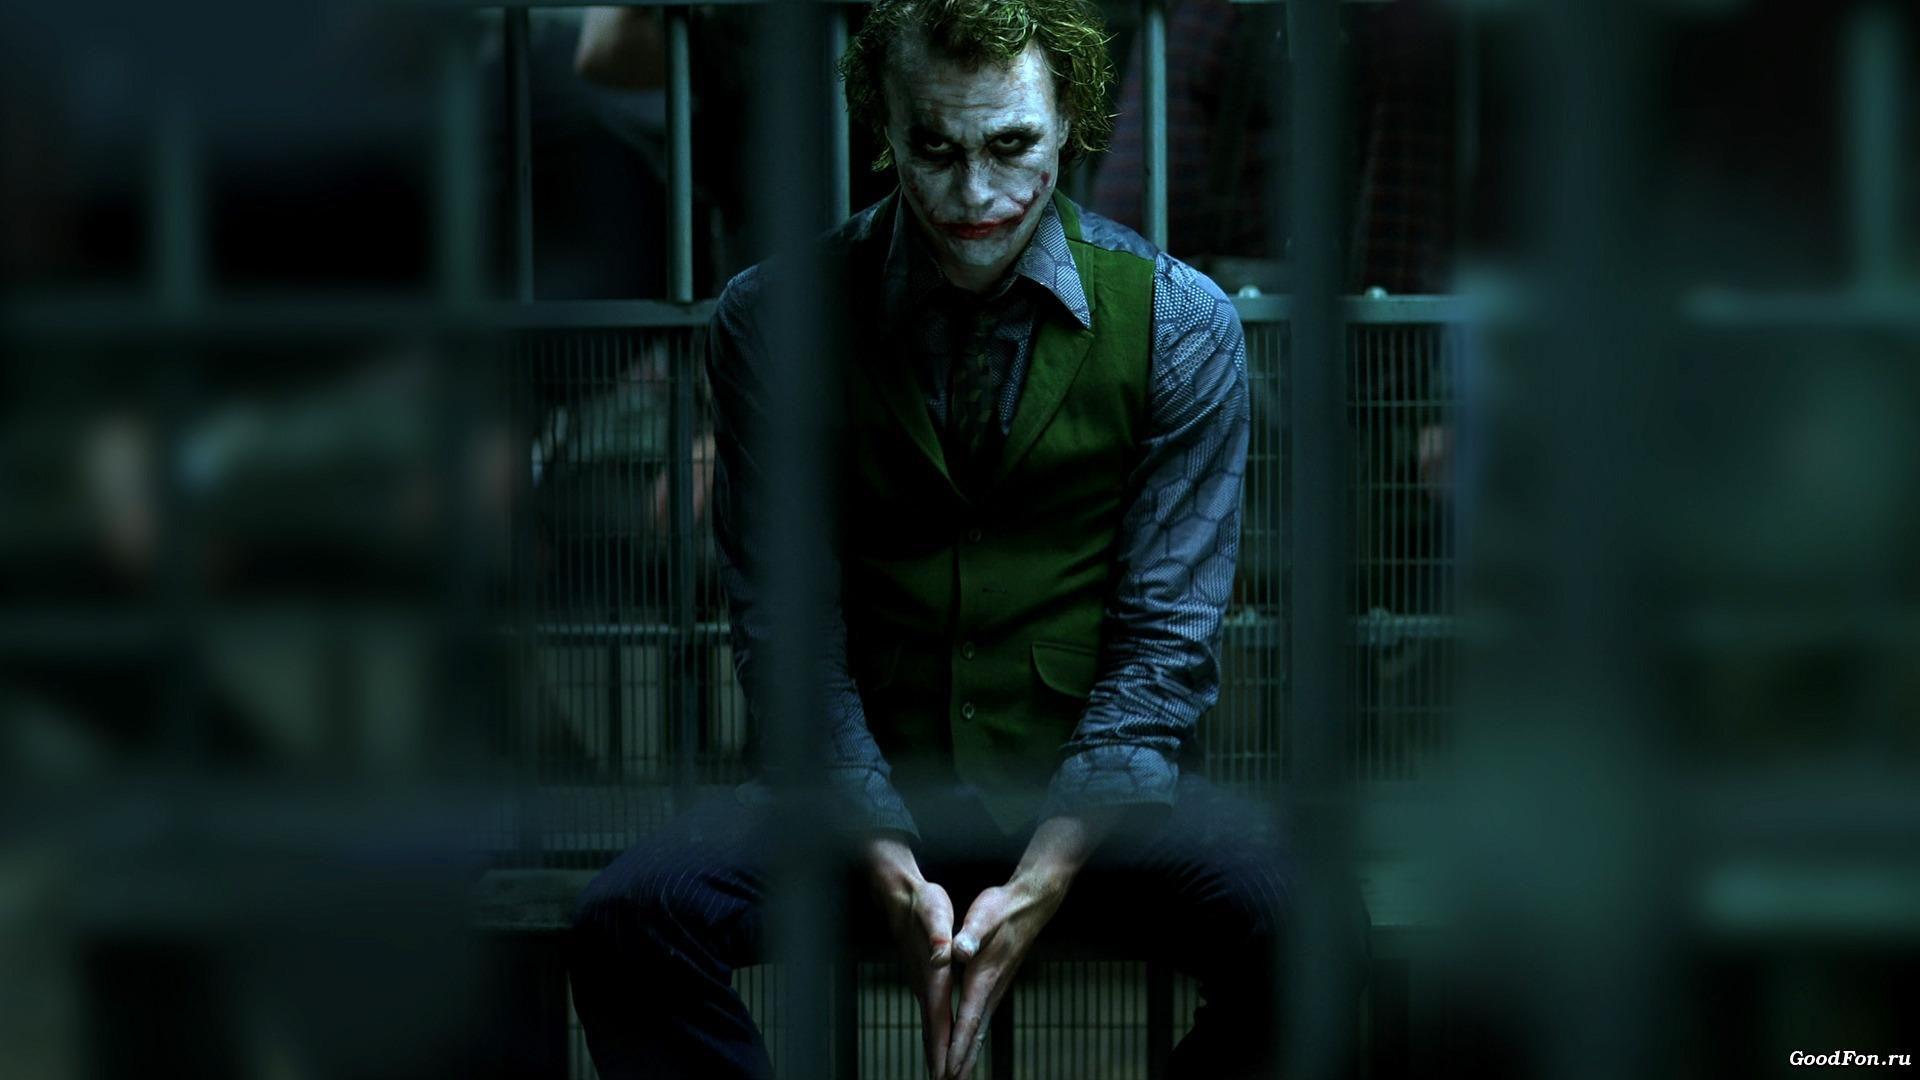 Download photo, picture, joker in jail full HD 1920×1080